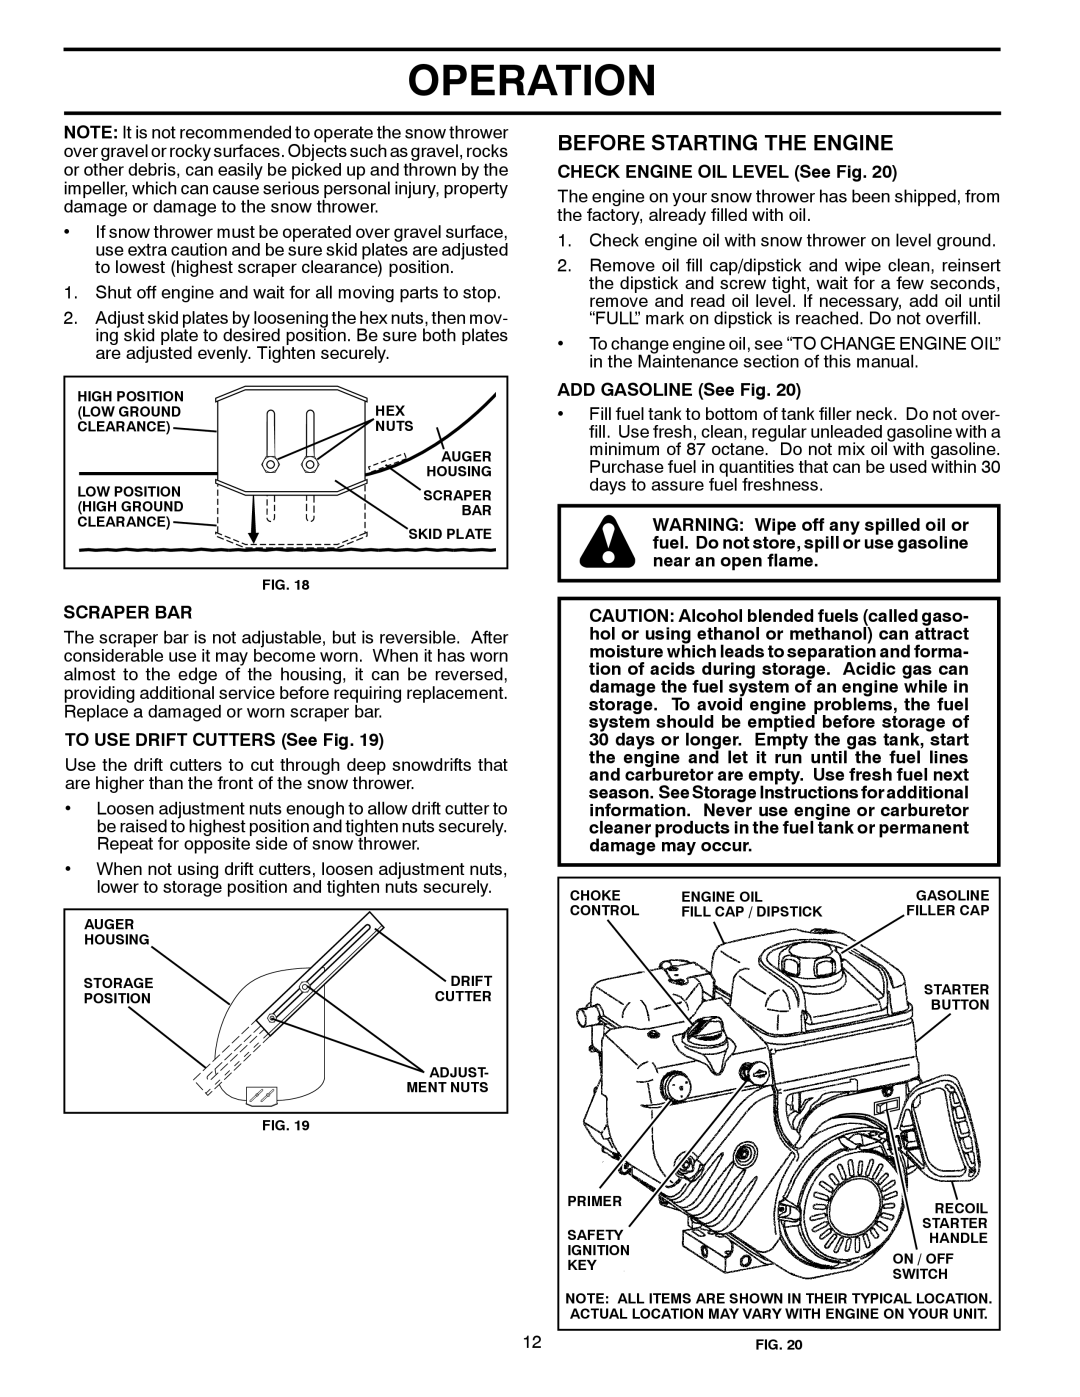 Husqvarna 10527SB-LS owner manual Before Starting The Engine, Operation, Scraper Bar, TO USE DRIFT CUTTERS See Fig 